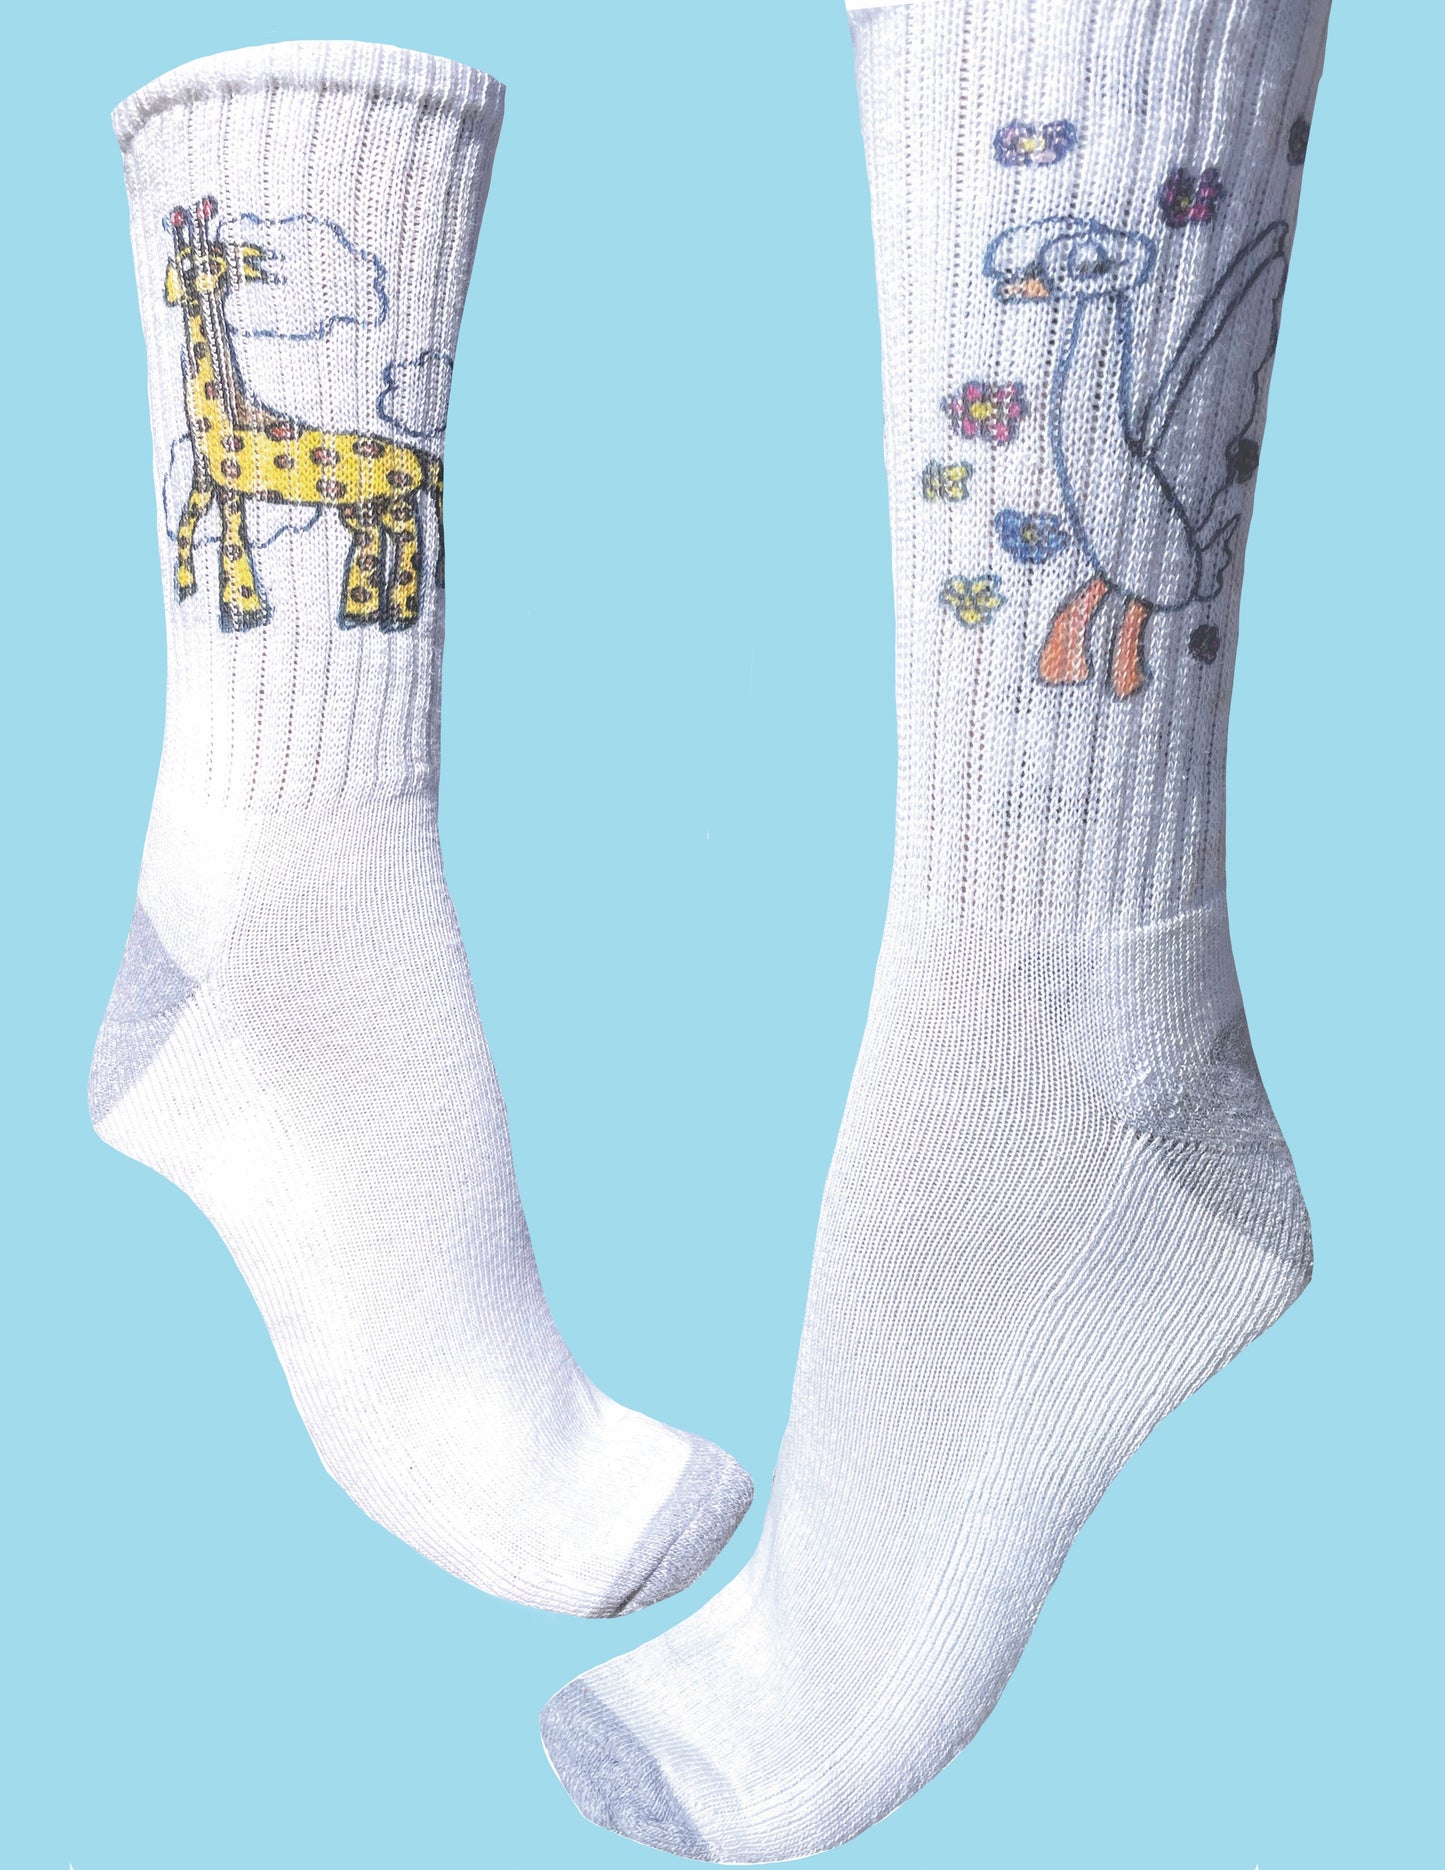 Sock of the Week @theartdepartment_maine by Destiny L